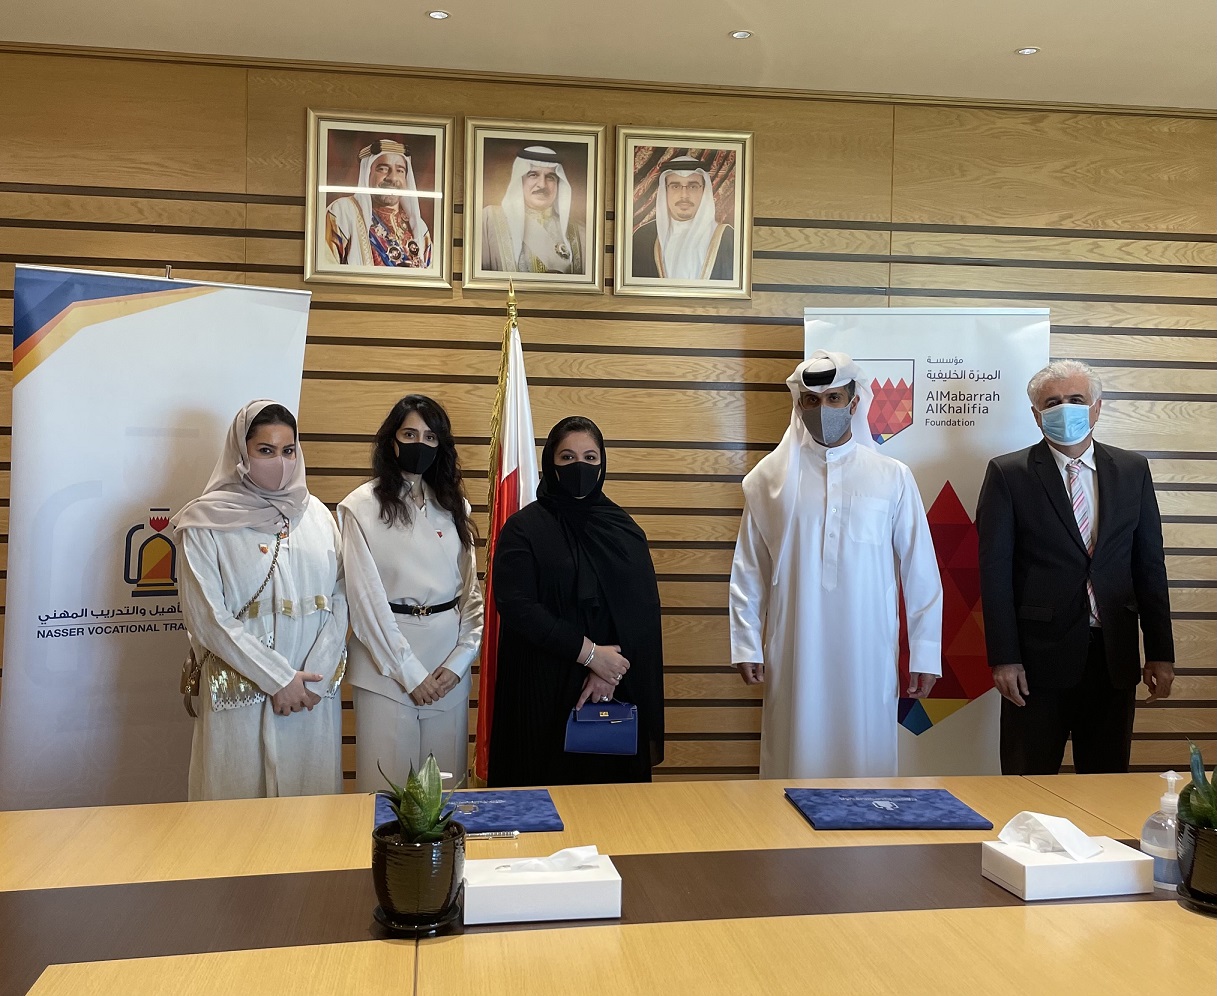 AlMabarrah AlKhalifia Foundation Signs an MoU with Nasser Vocational Training Center